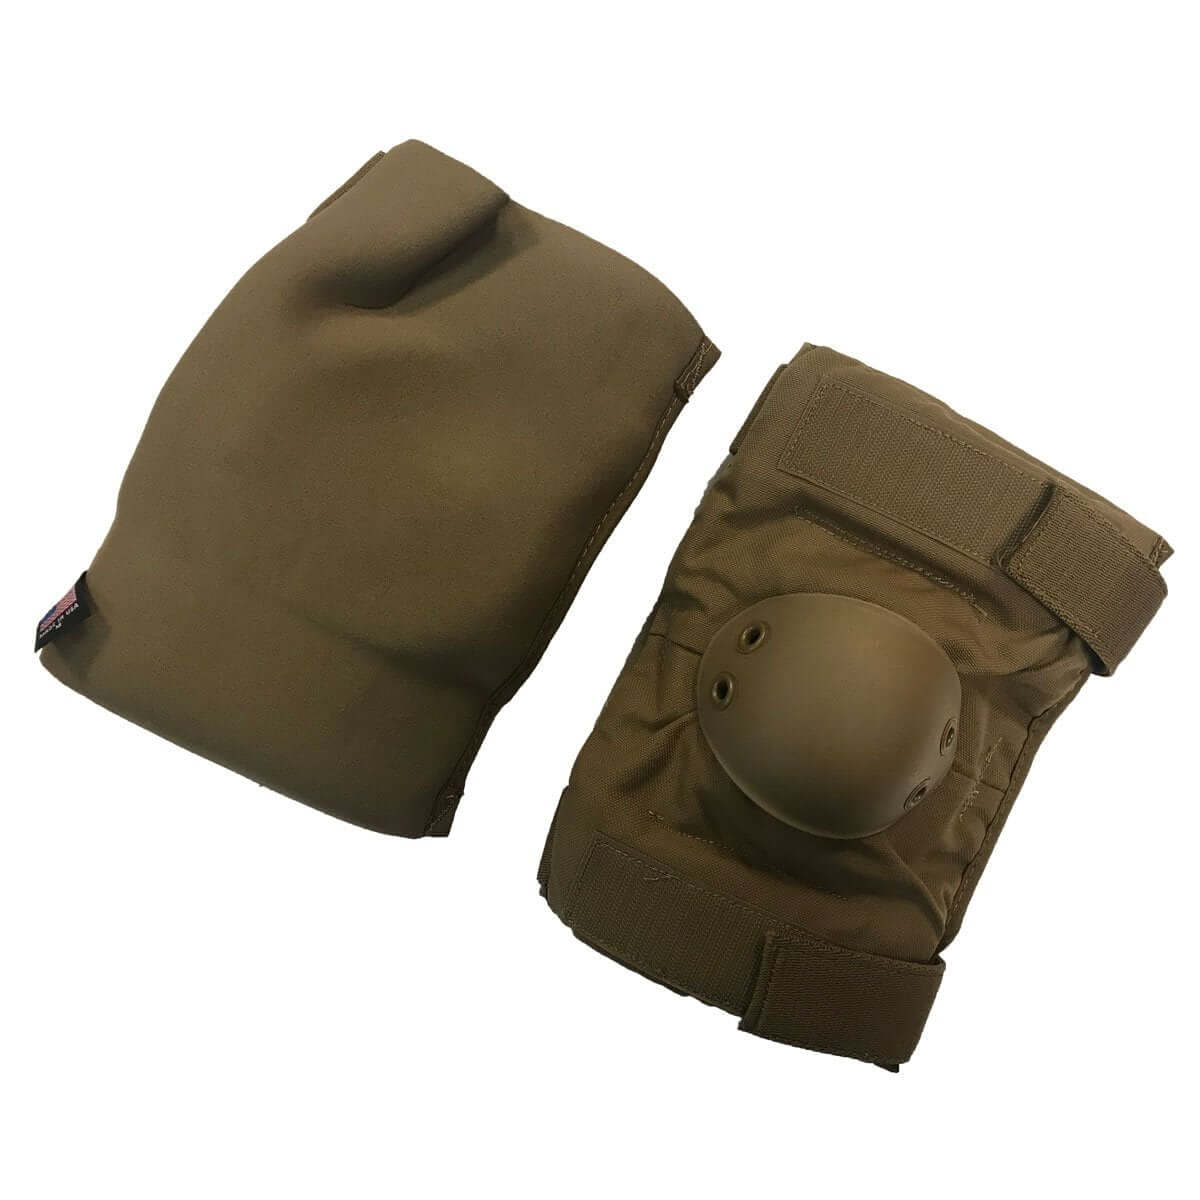 Tactical Elbow Pads in Tan